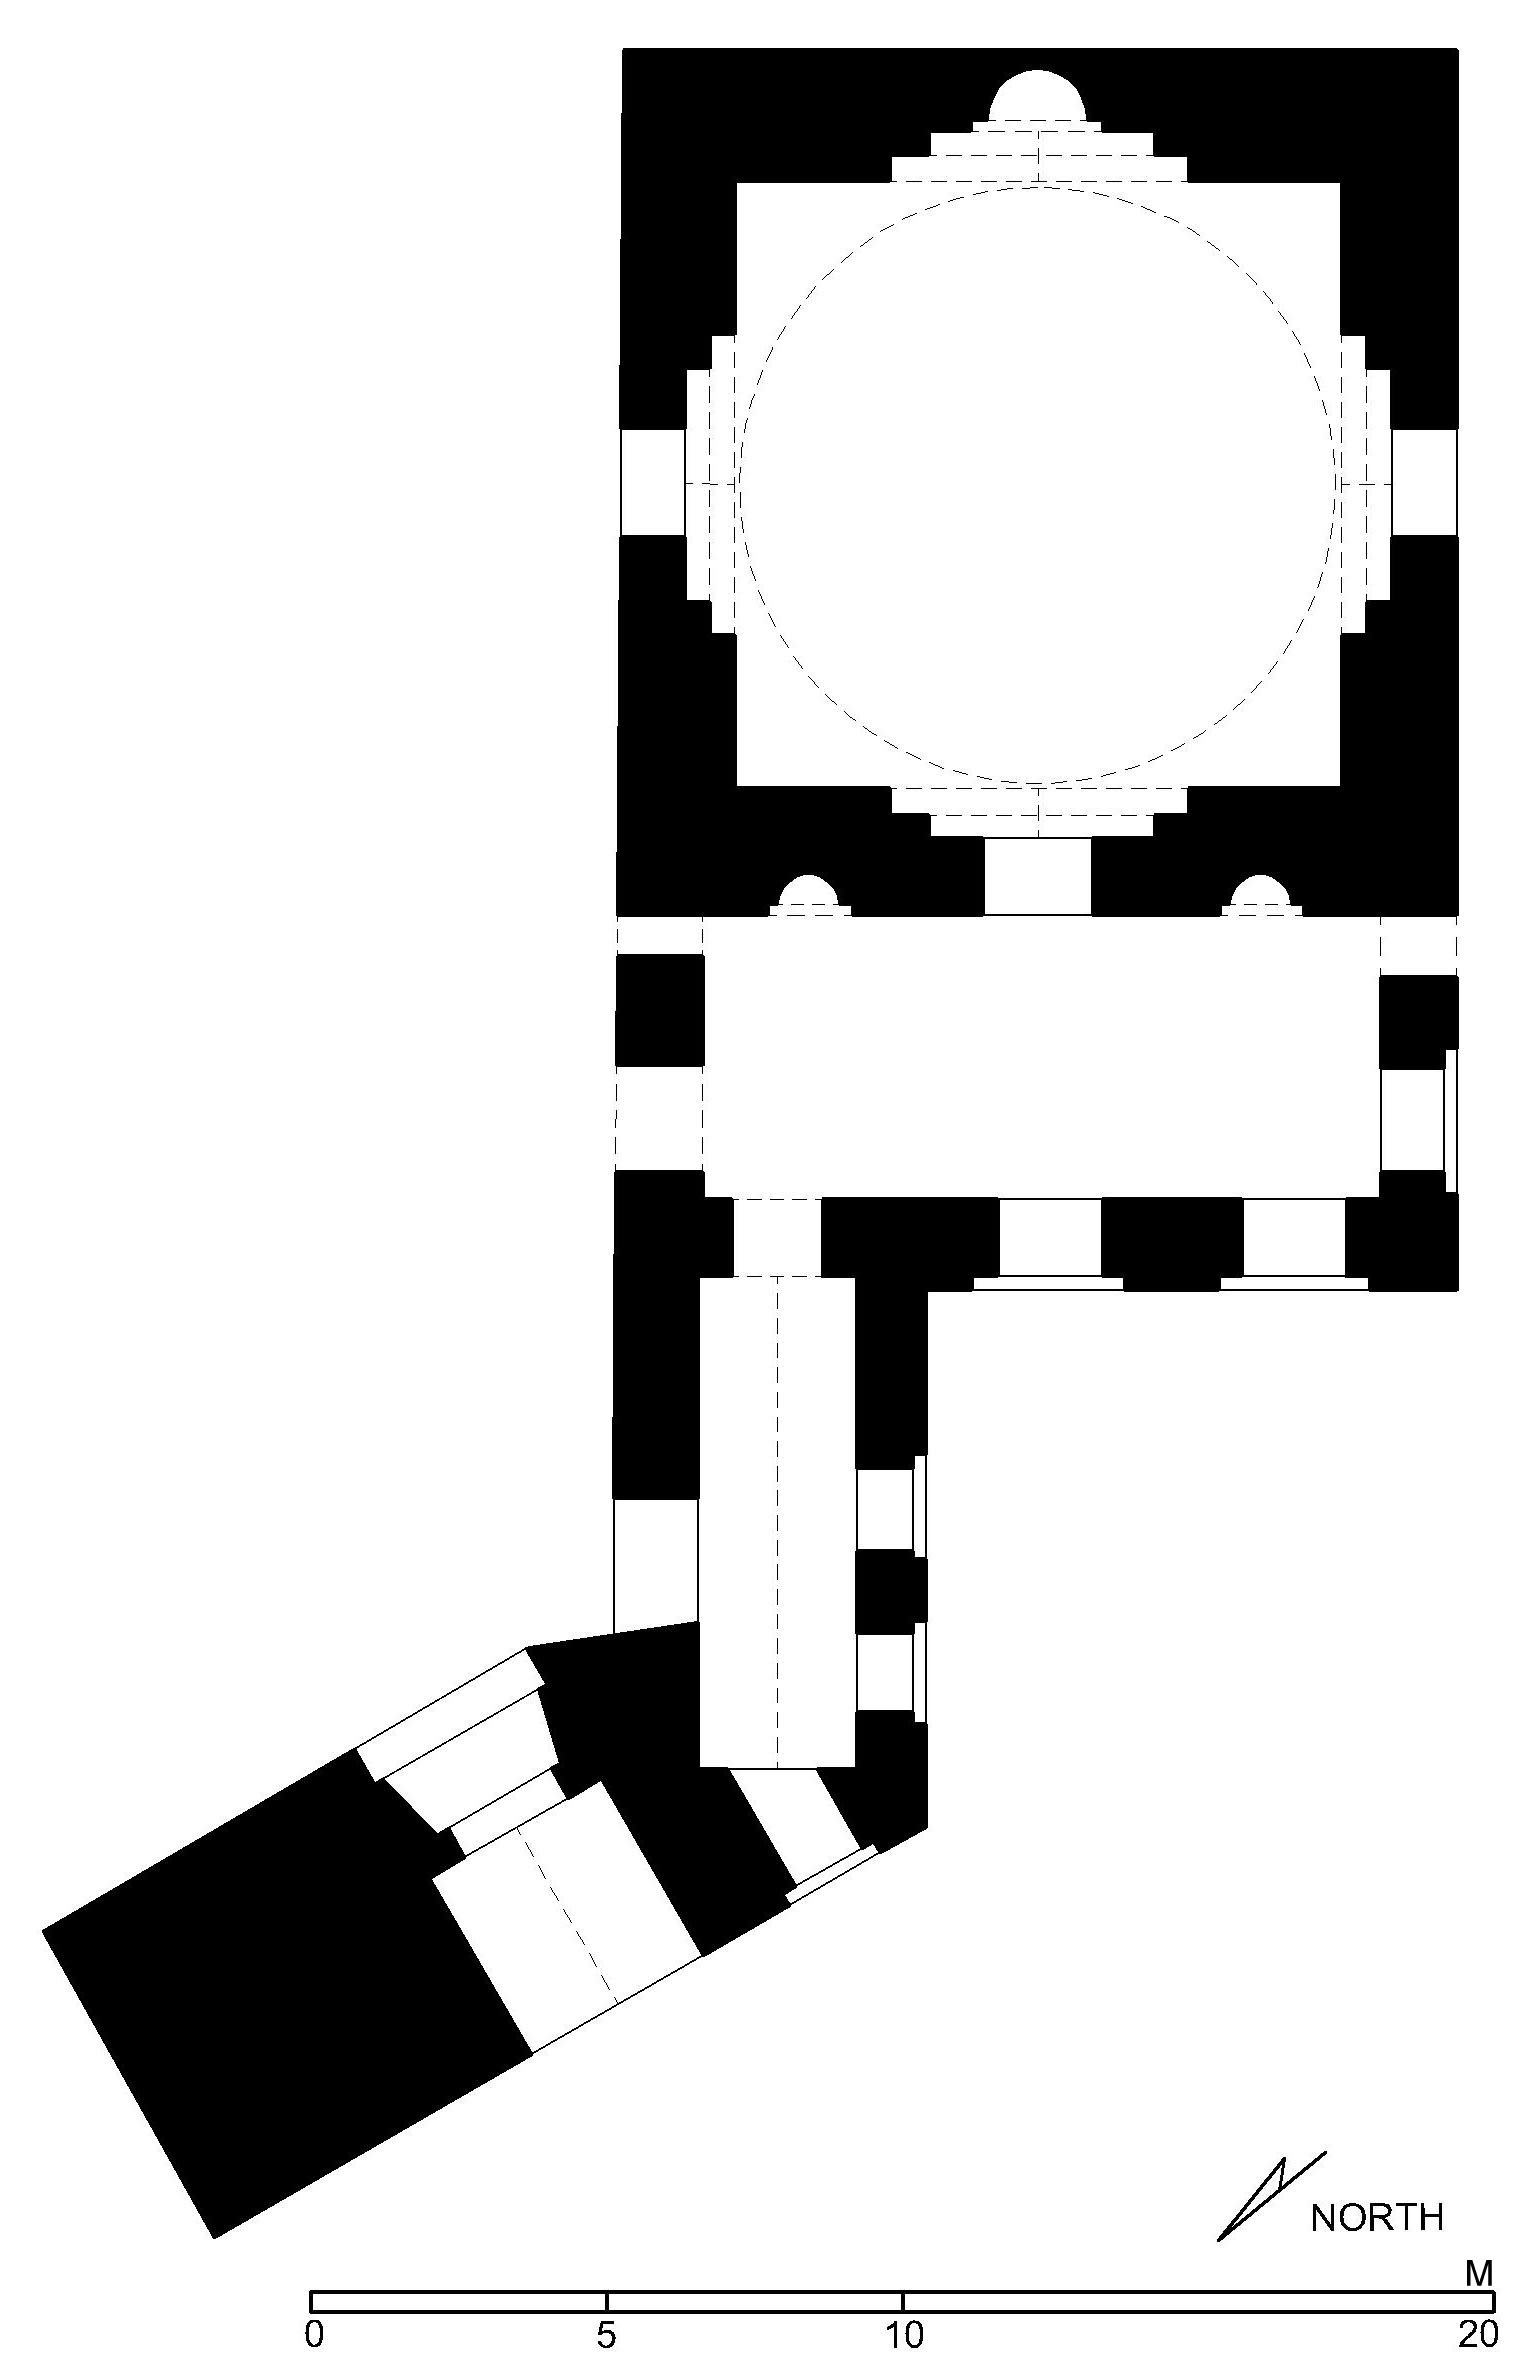 Madrasa wa-Qubbat Umm al-Salih 'Ali - Floor plan of madrasa and mausoleum (after Meinecke) in AutoCAD 2000 format. Click the download button to download a zipped file containing the .dwg file.